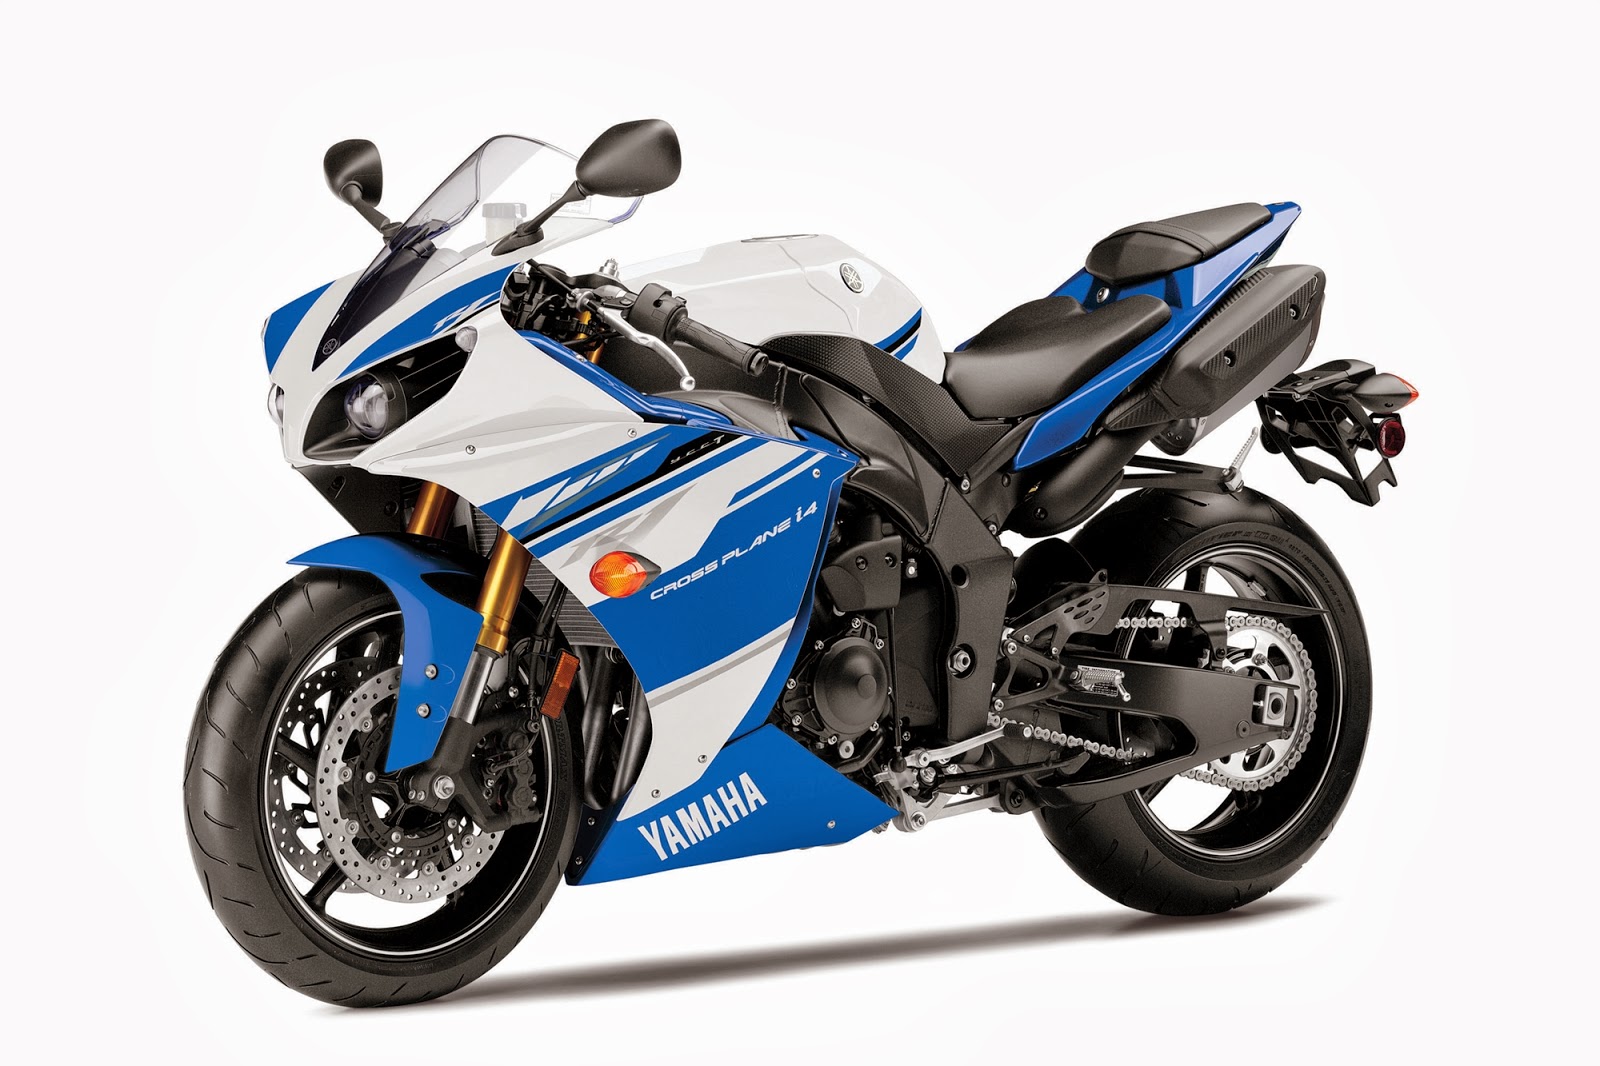 Yamaha YZF-R1 2014 | Review and Photos | Riders